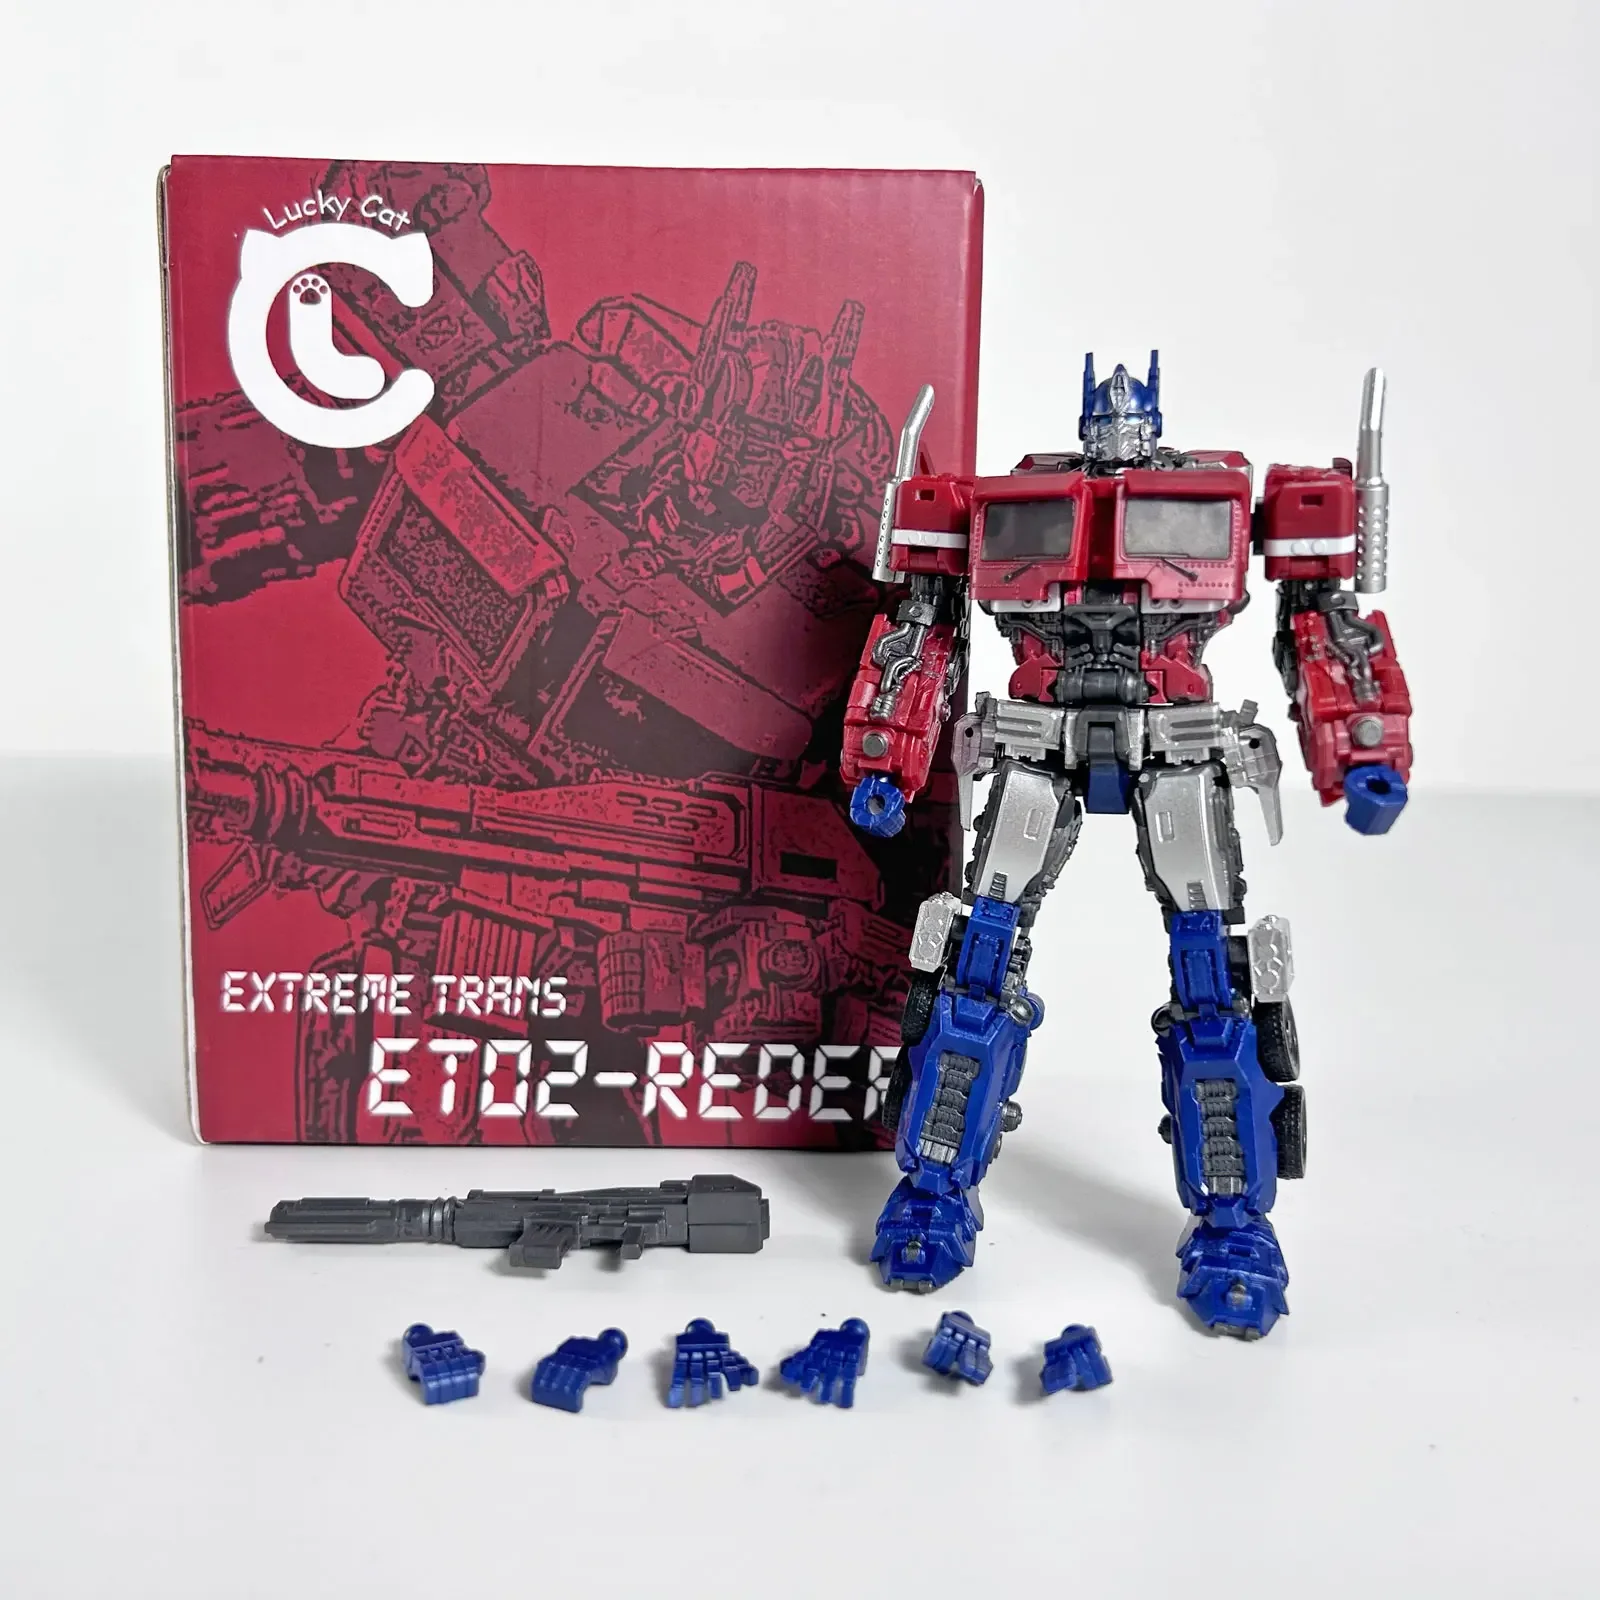 

LC Transformation ET-02 ET02 Reder Robot Toy Lucky Cat MICRO COSMOS Extreme Trans OP Figure toy in stock